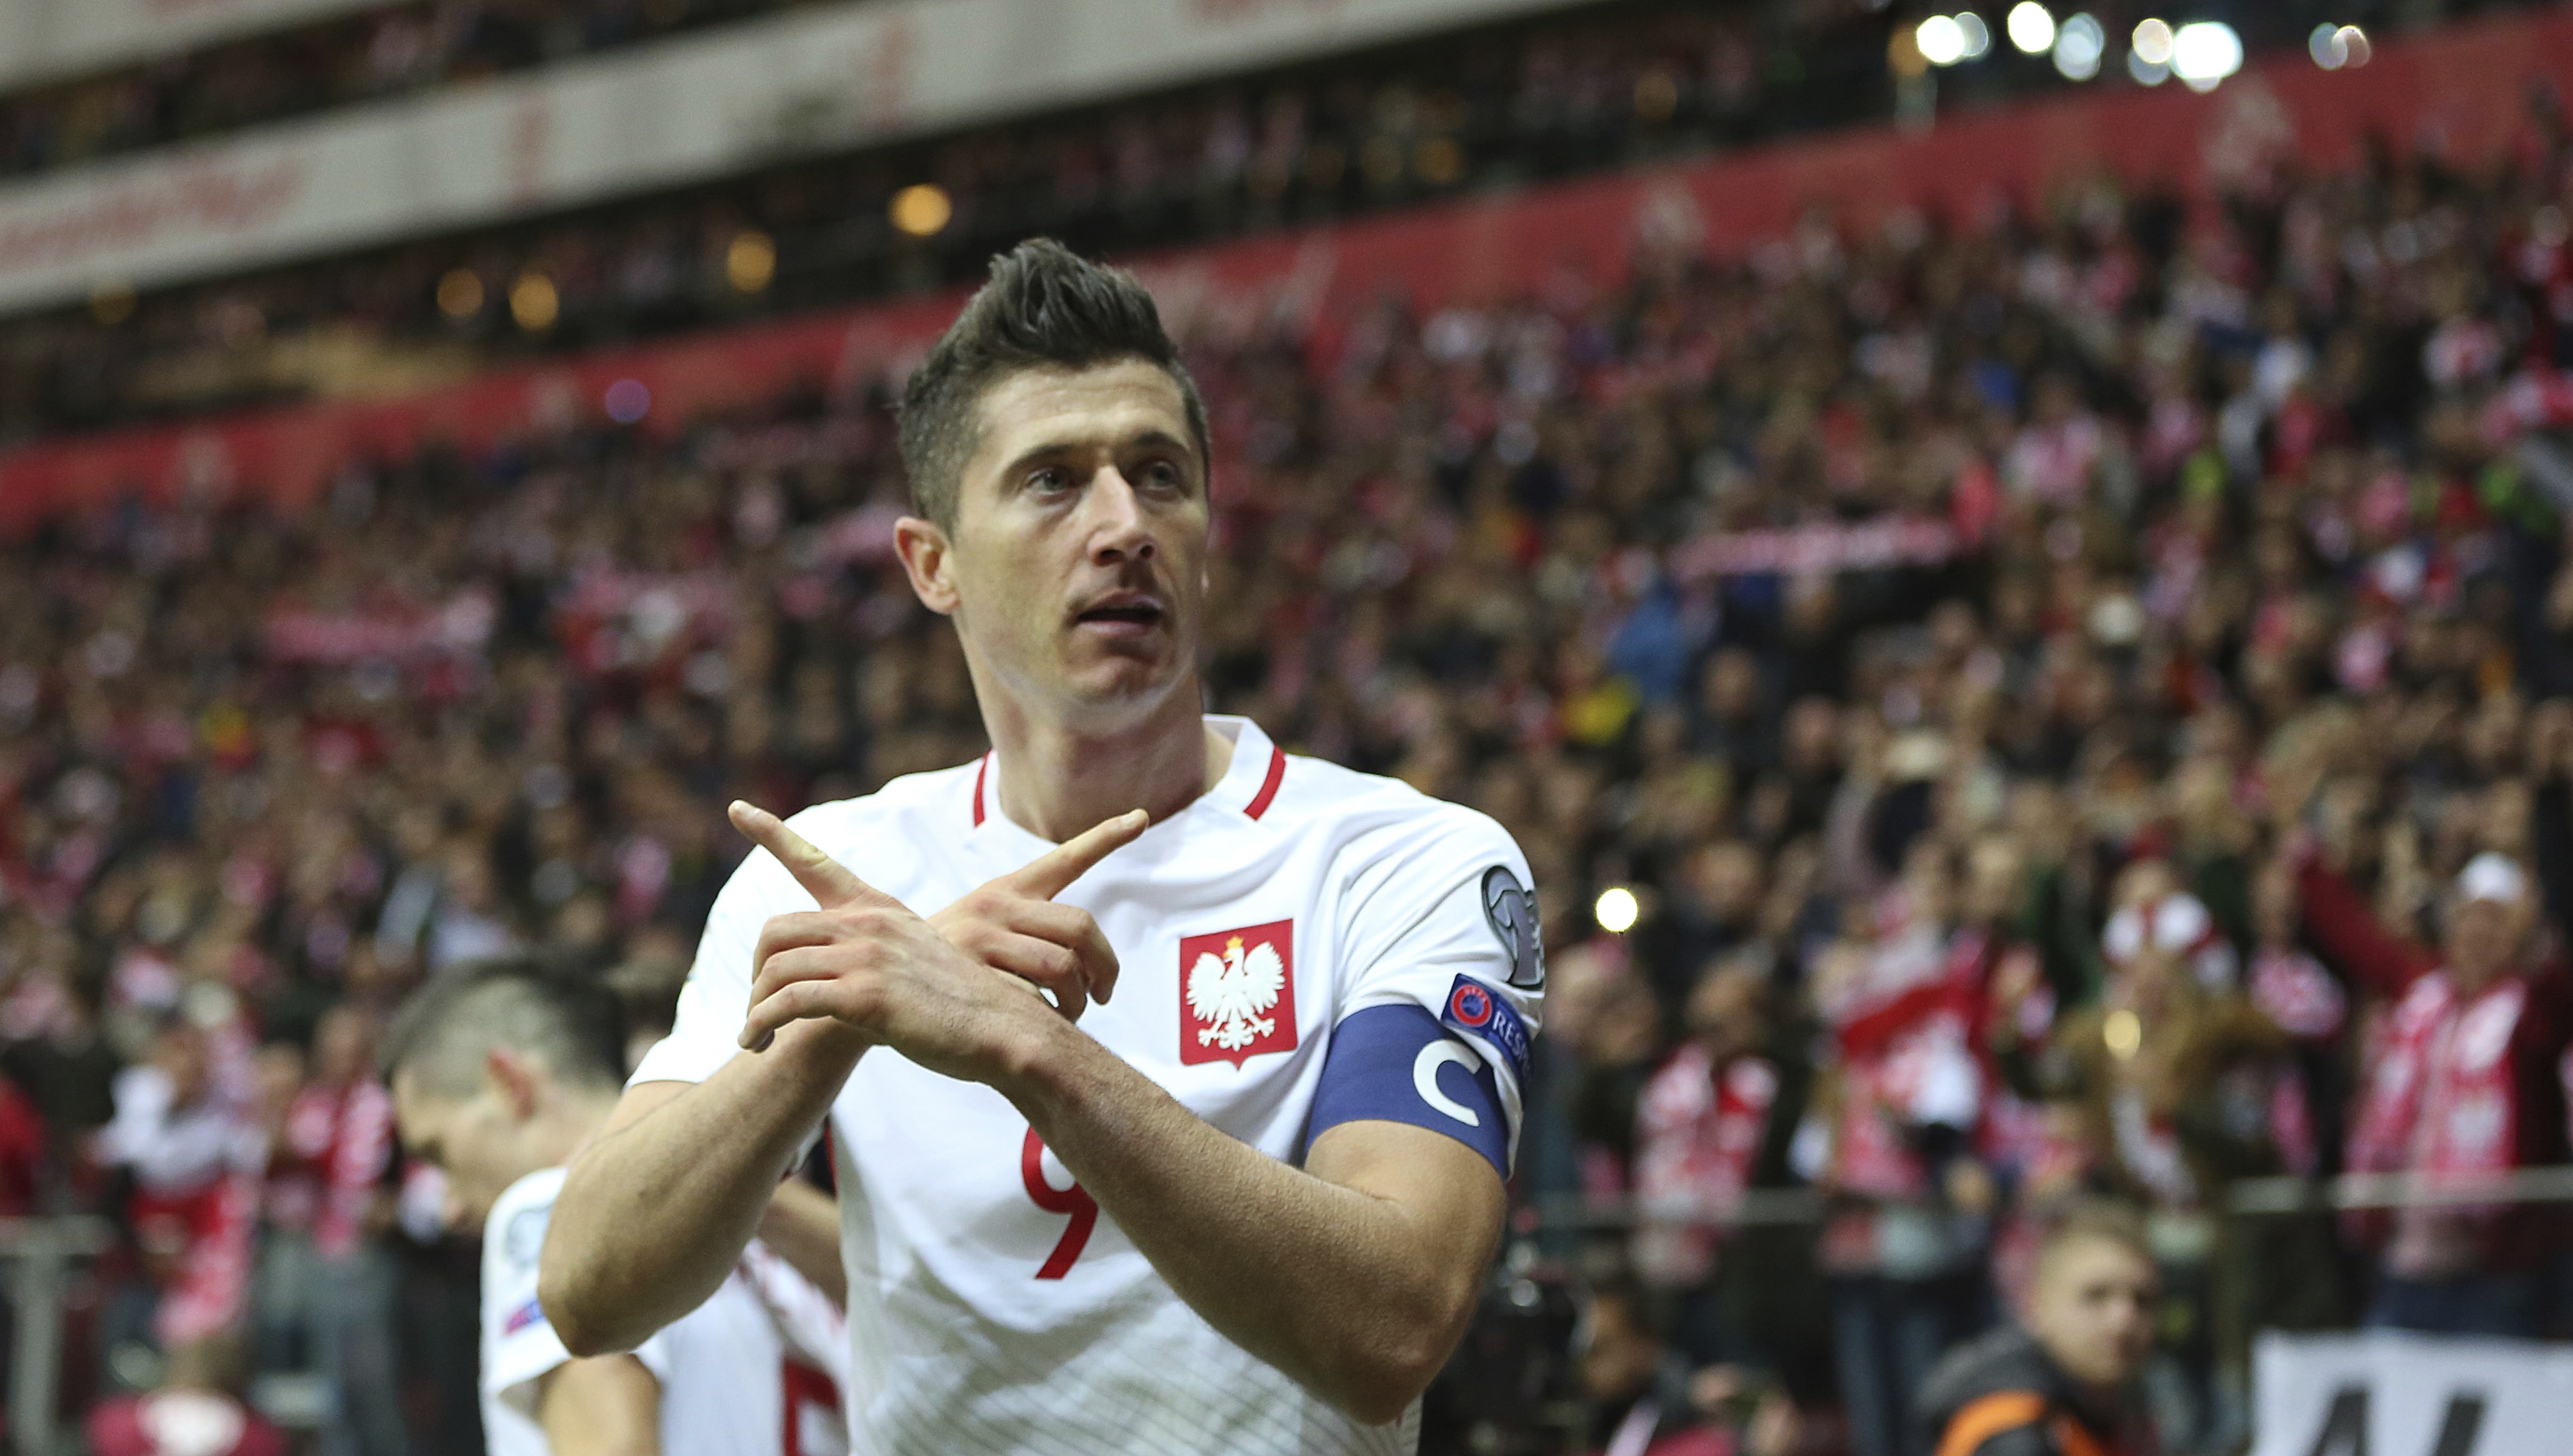 Poland’s Robert Lewandowski reacts after he scored a goal during the World Cup group E qualifier against Montenegro. Photo: AP